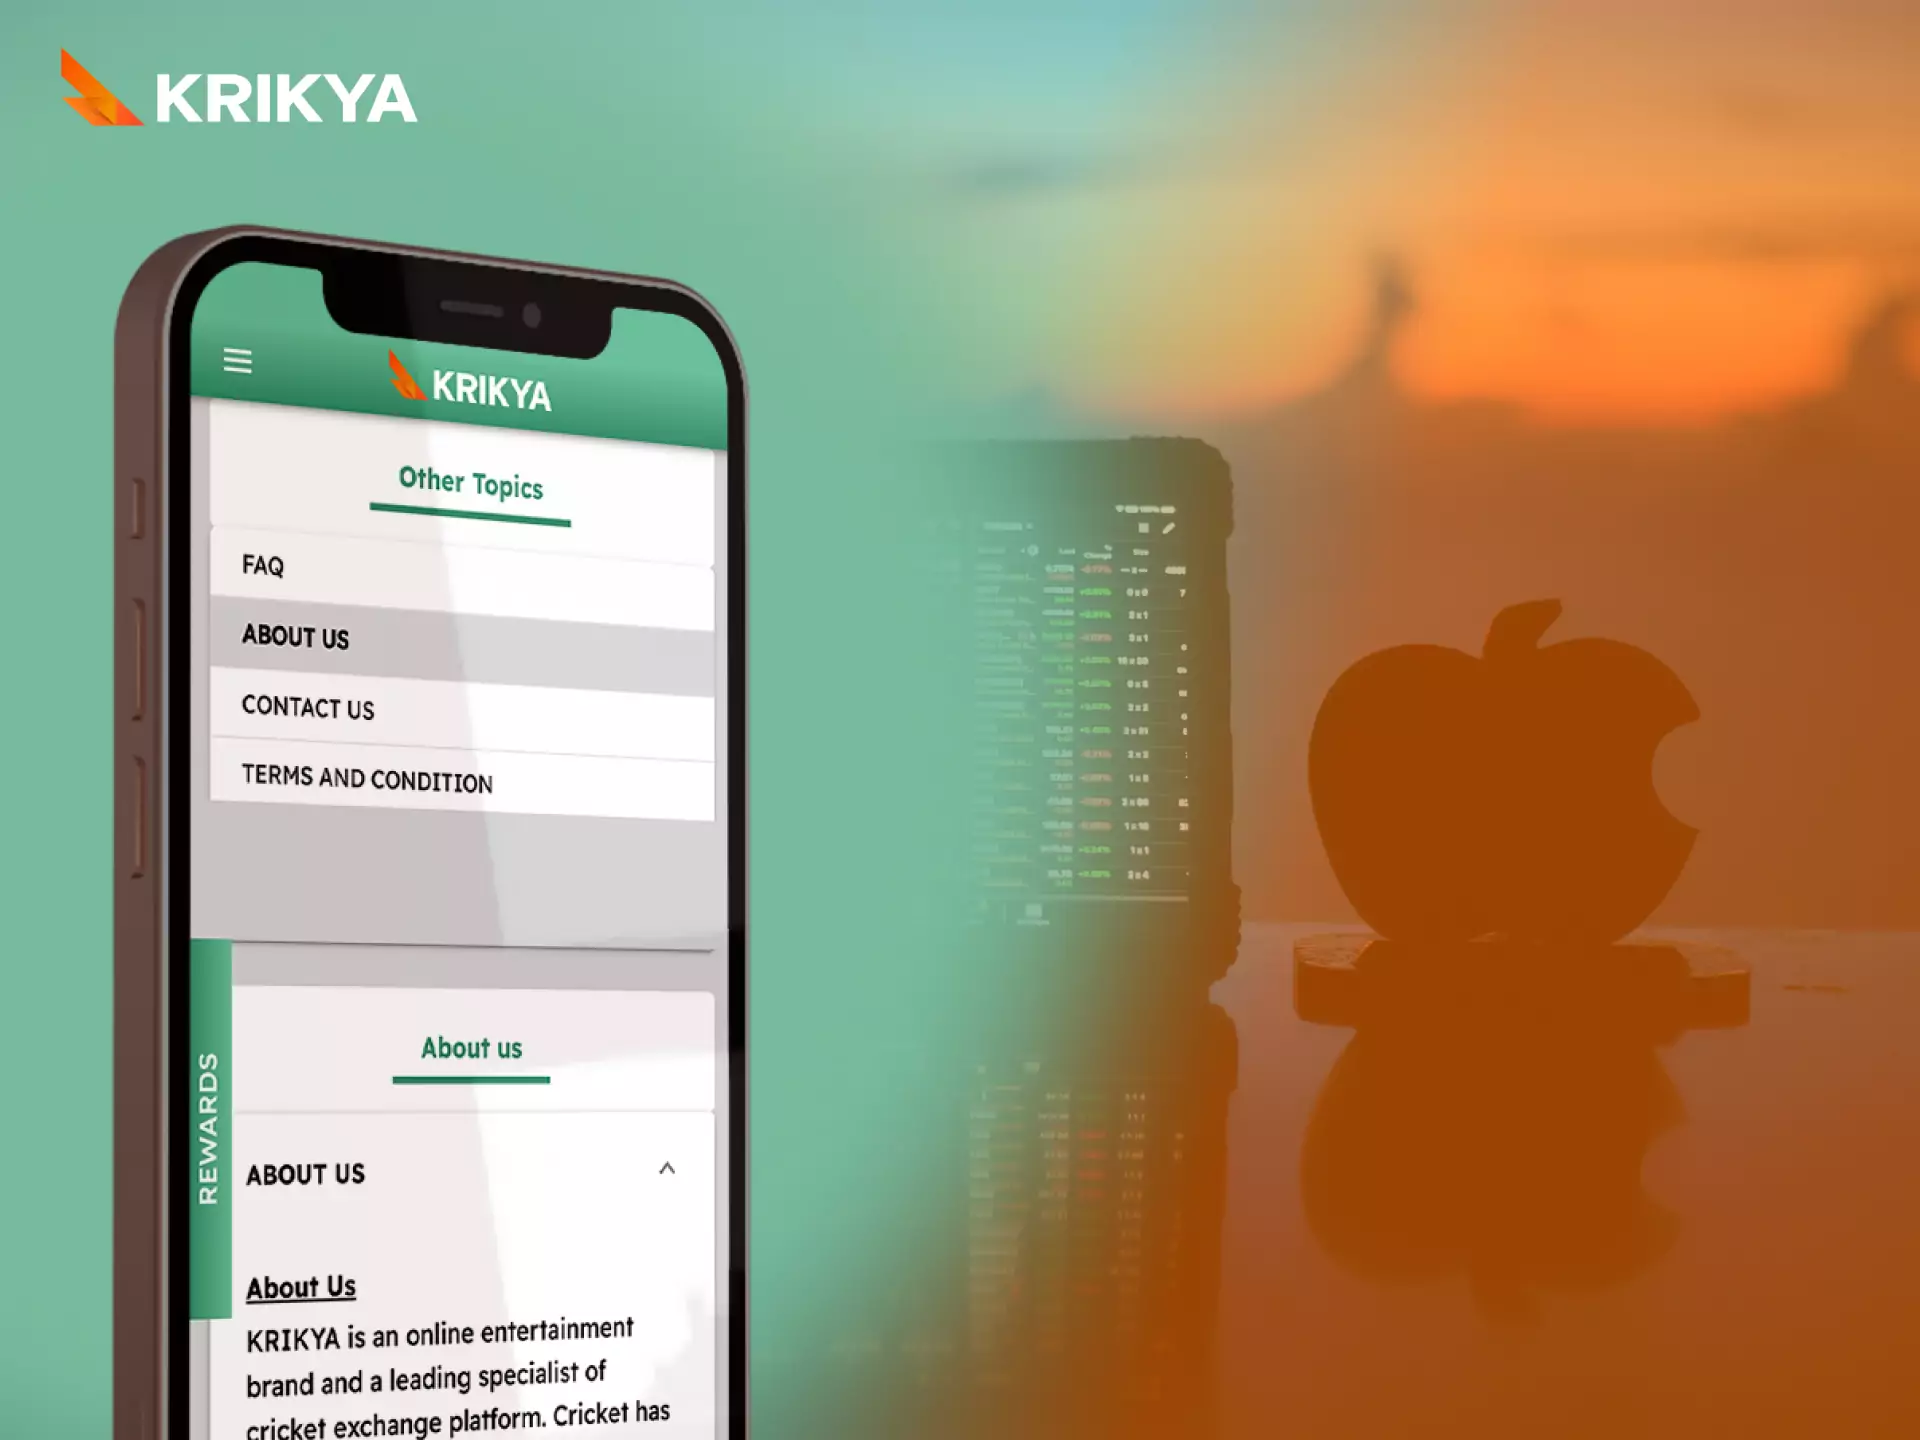 Download the Krikya app for iOS devices with this instruction.